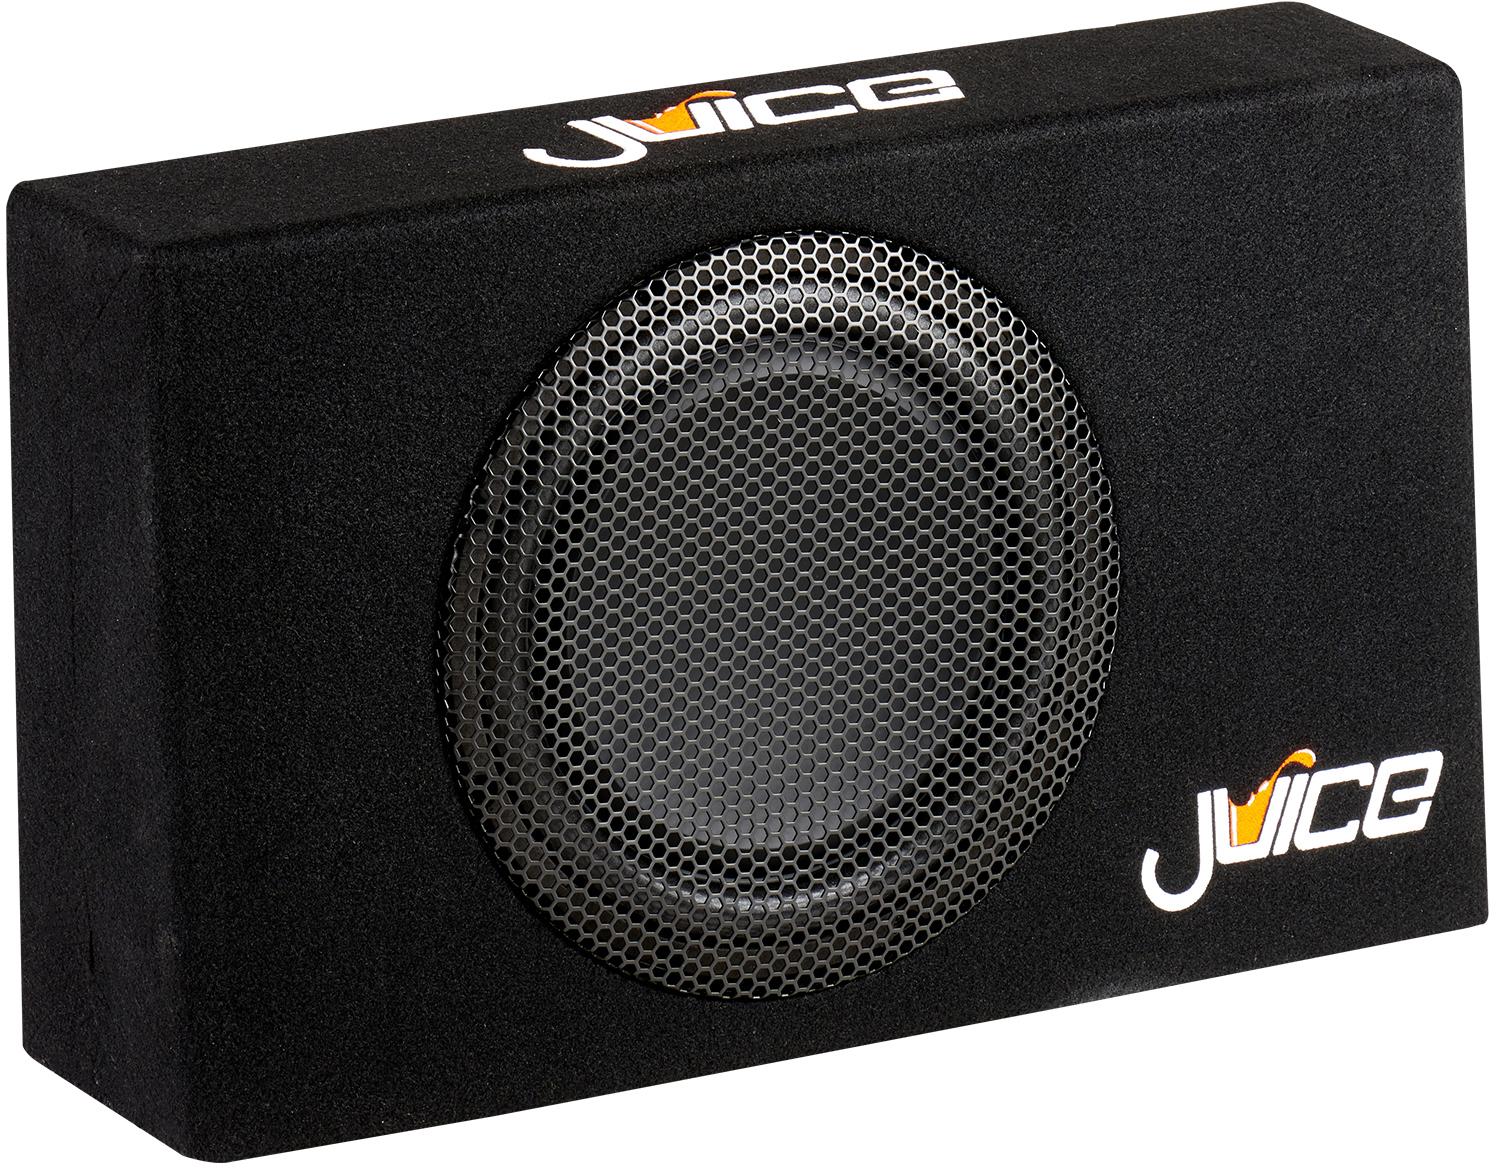 Juice A12Sl 900W 12 Inch Shallow Active Subwoofer